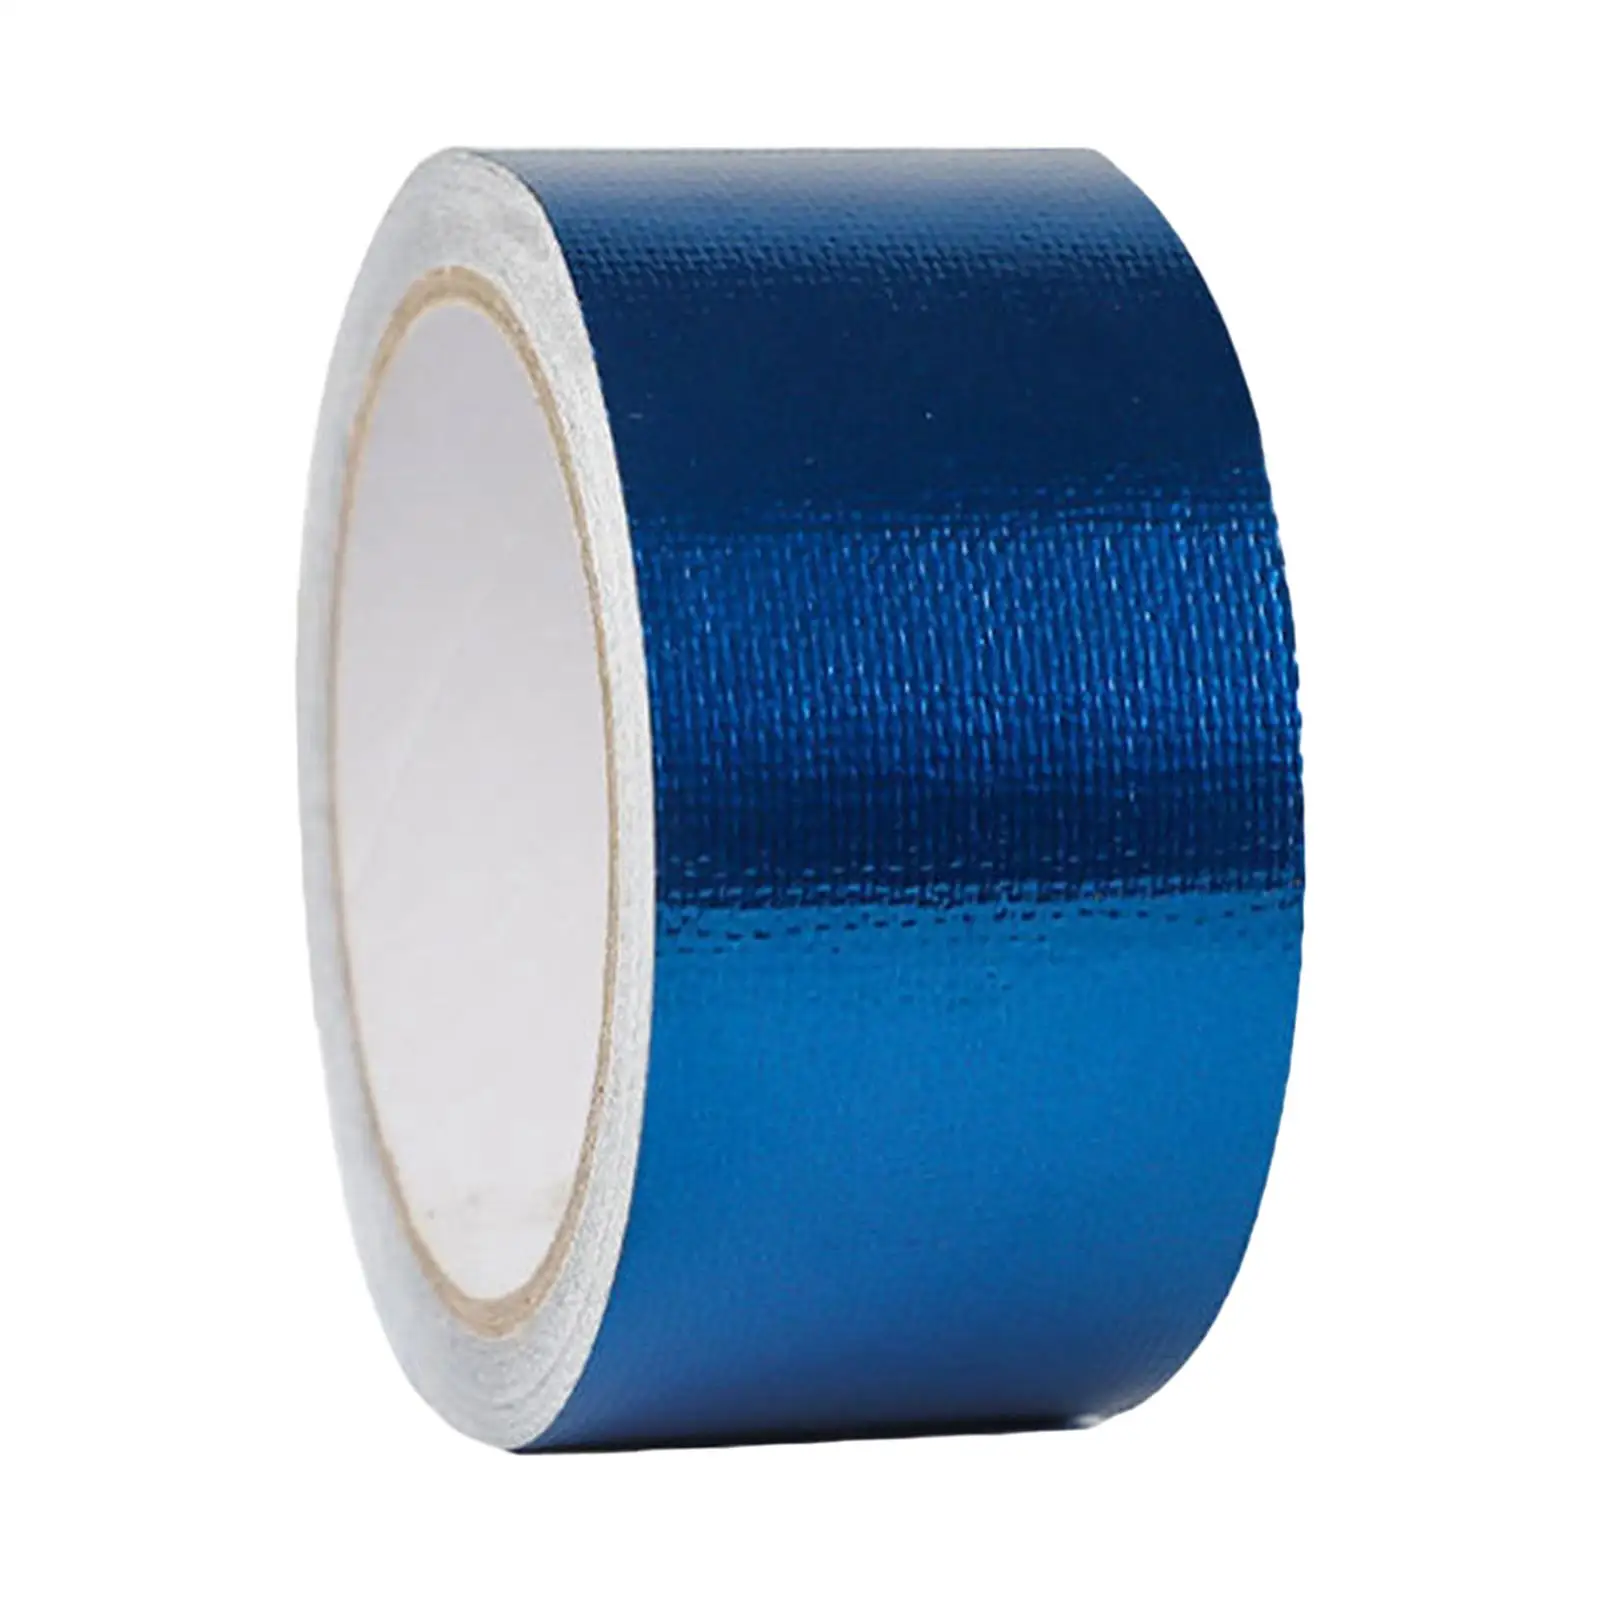 Tent Repair Tape Universal Strong Tape RV Awning Repair Tape 7.5M for Inflatable